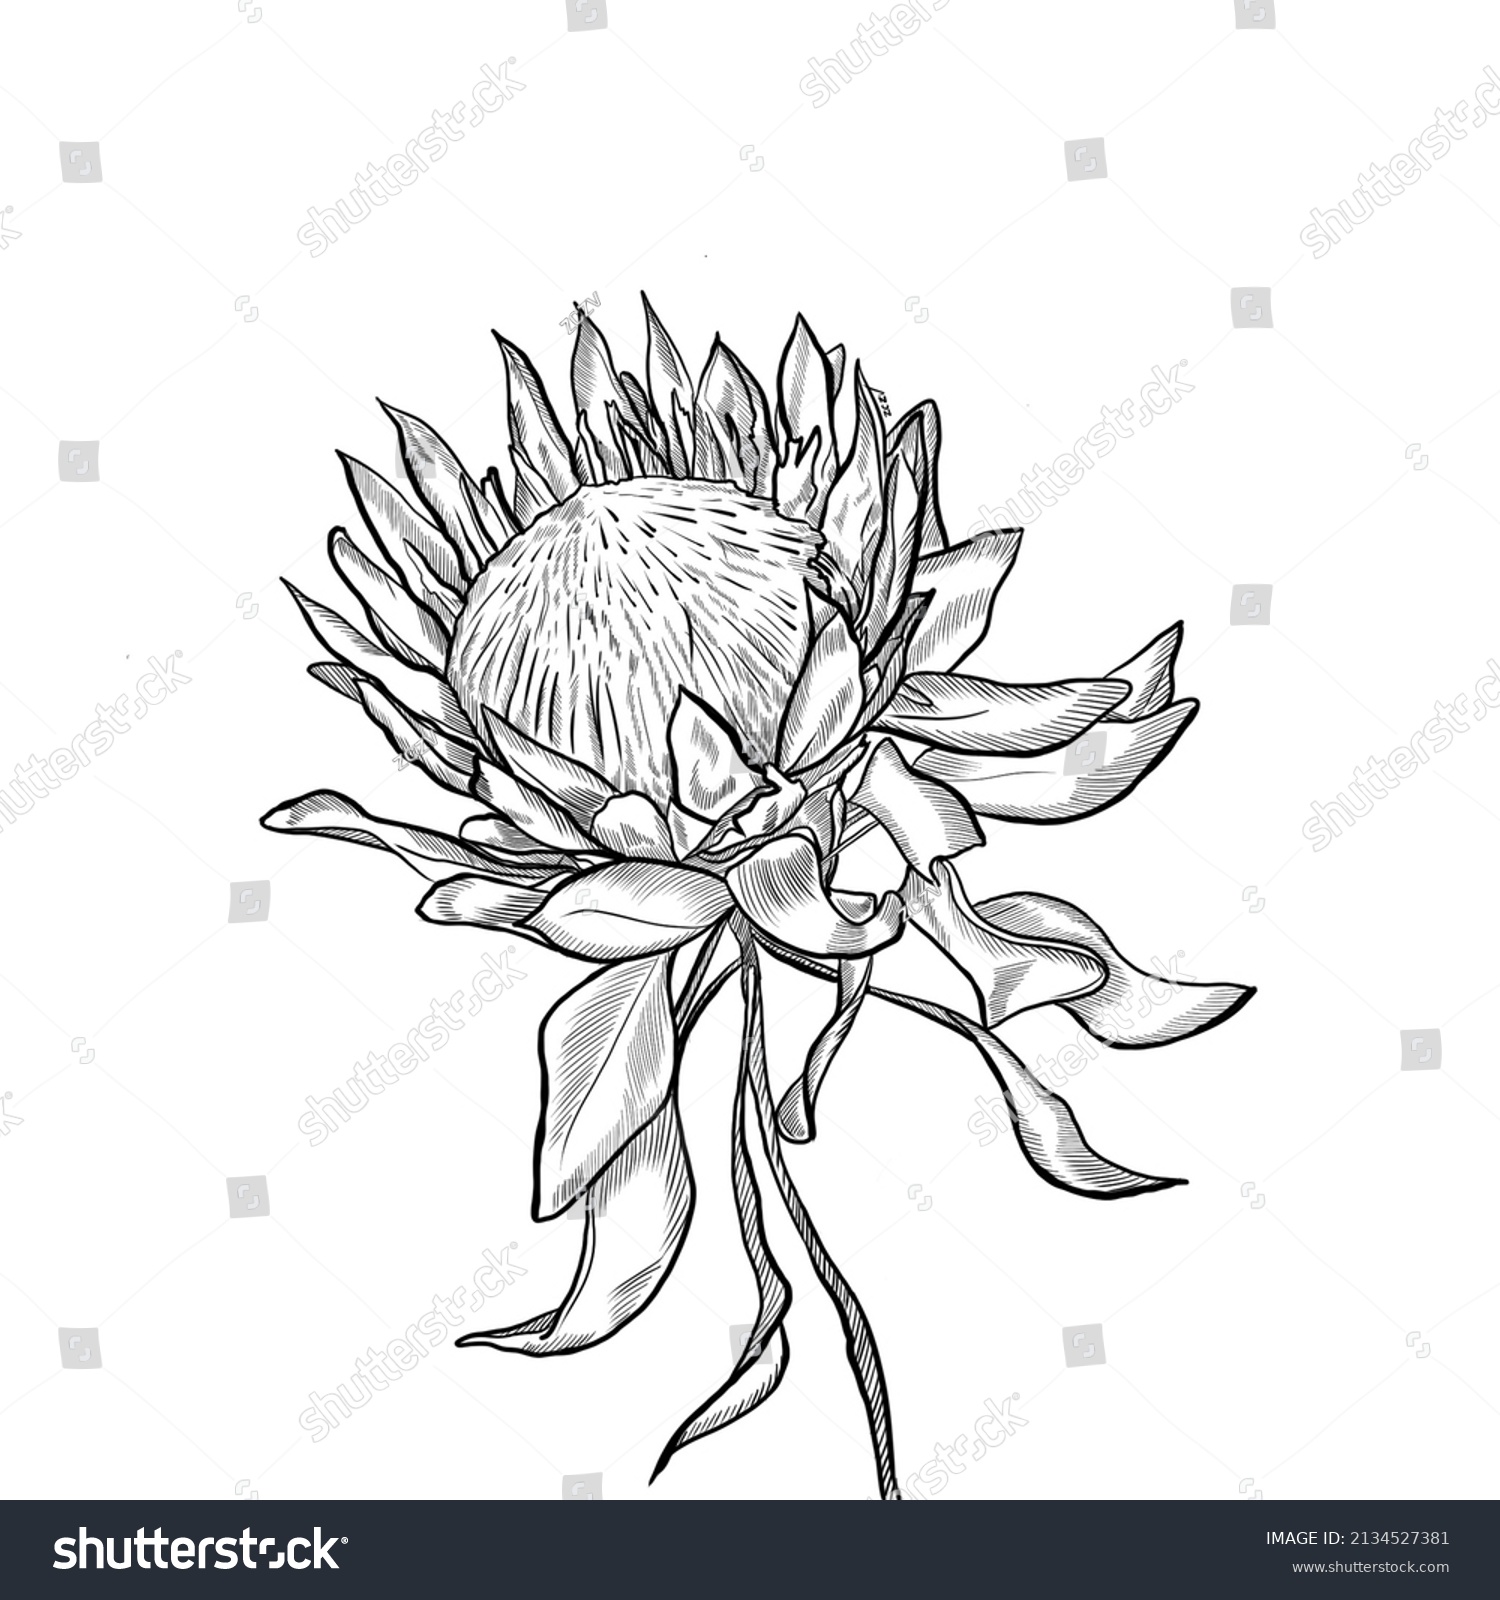 Lines Graphic Protea On White Background Stock Illustration 2134527381 ...